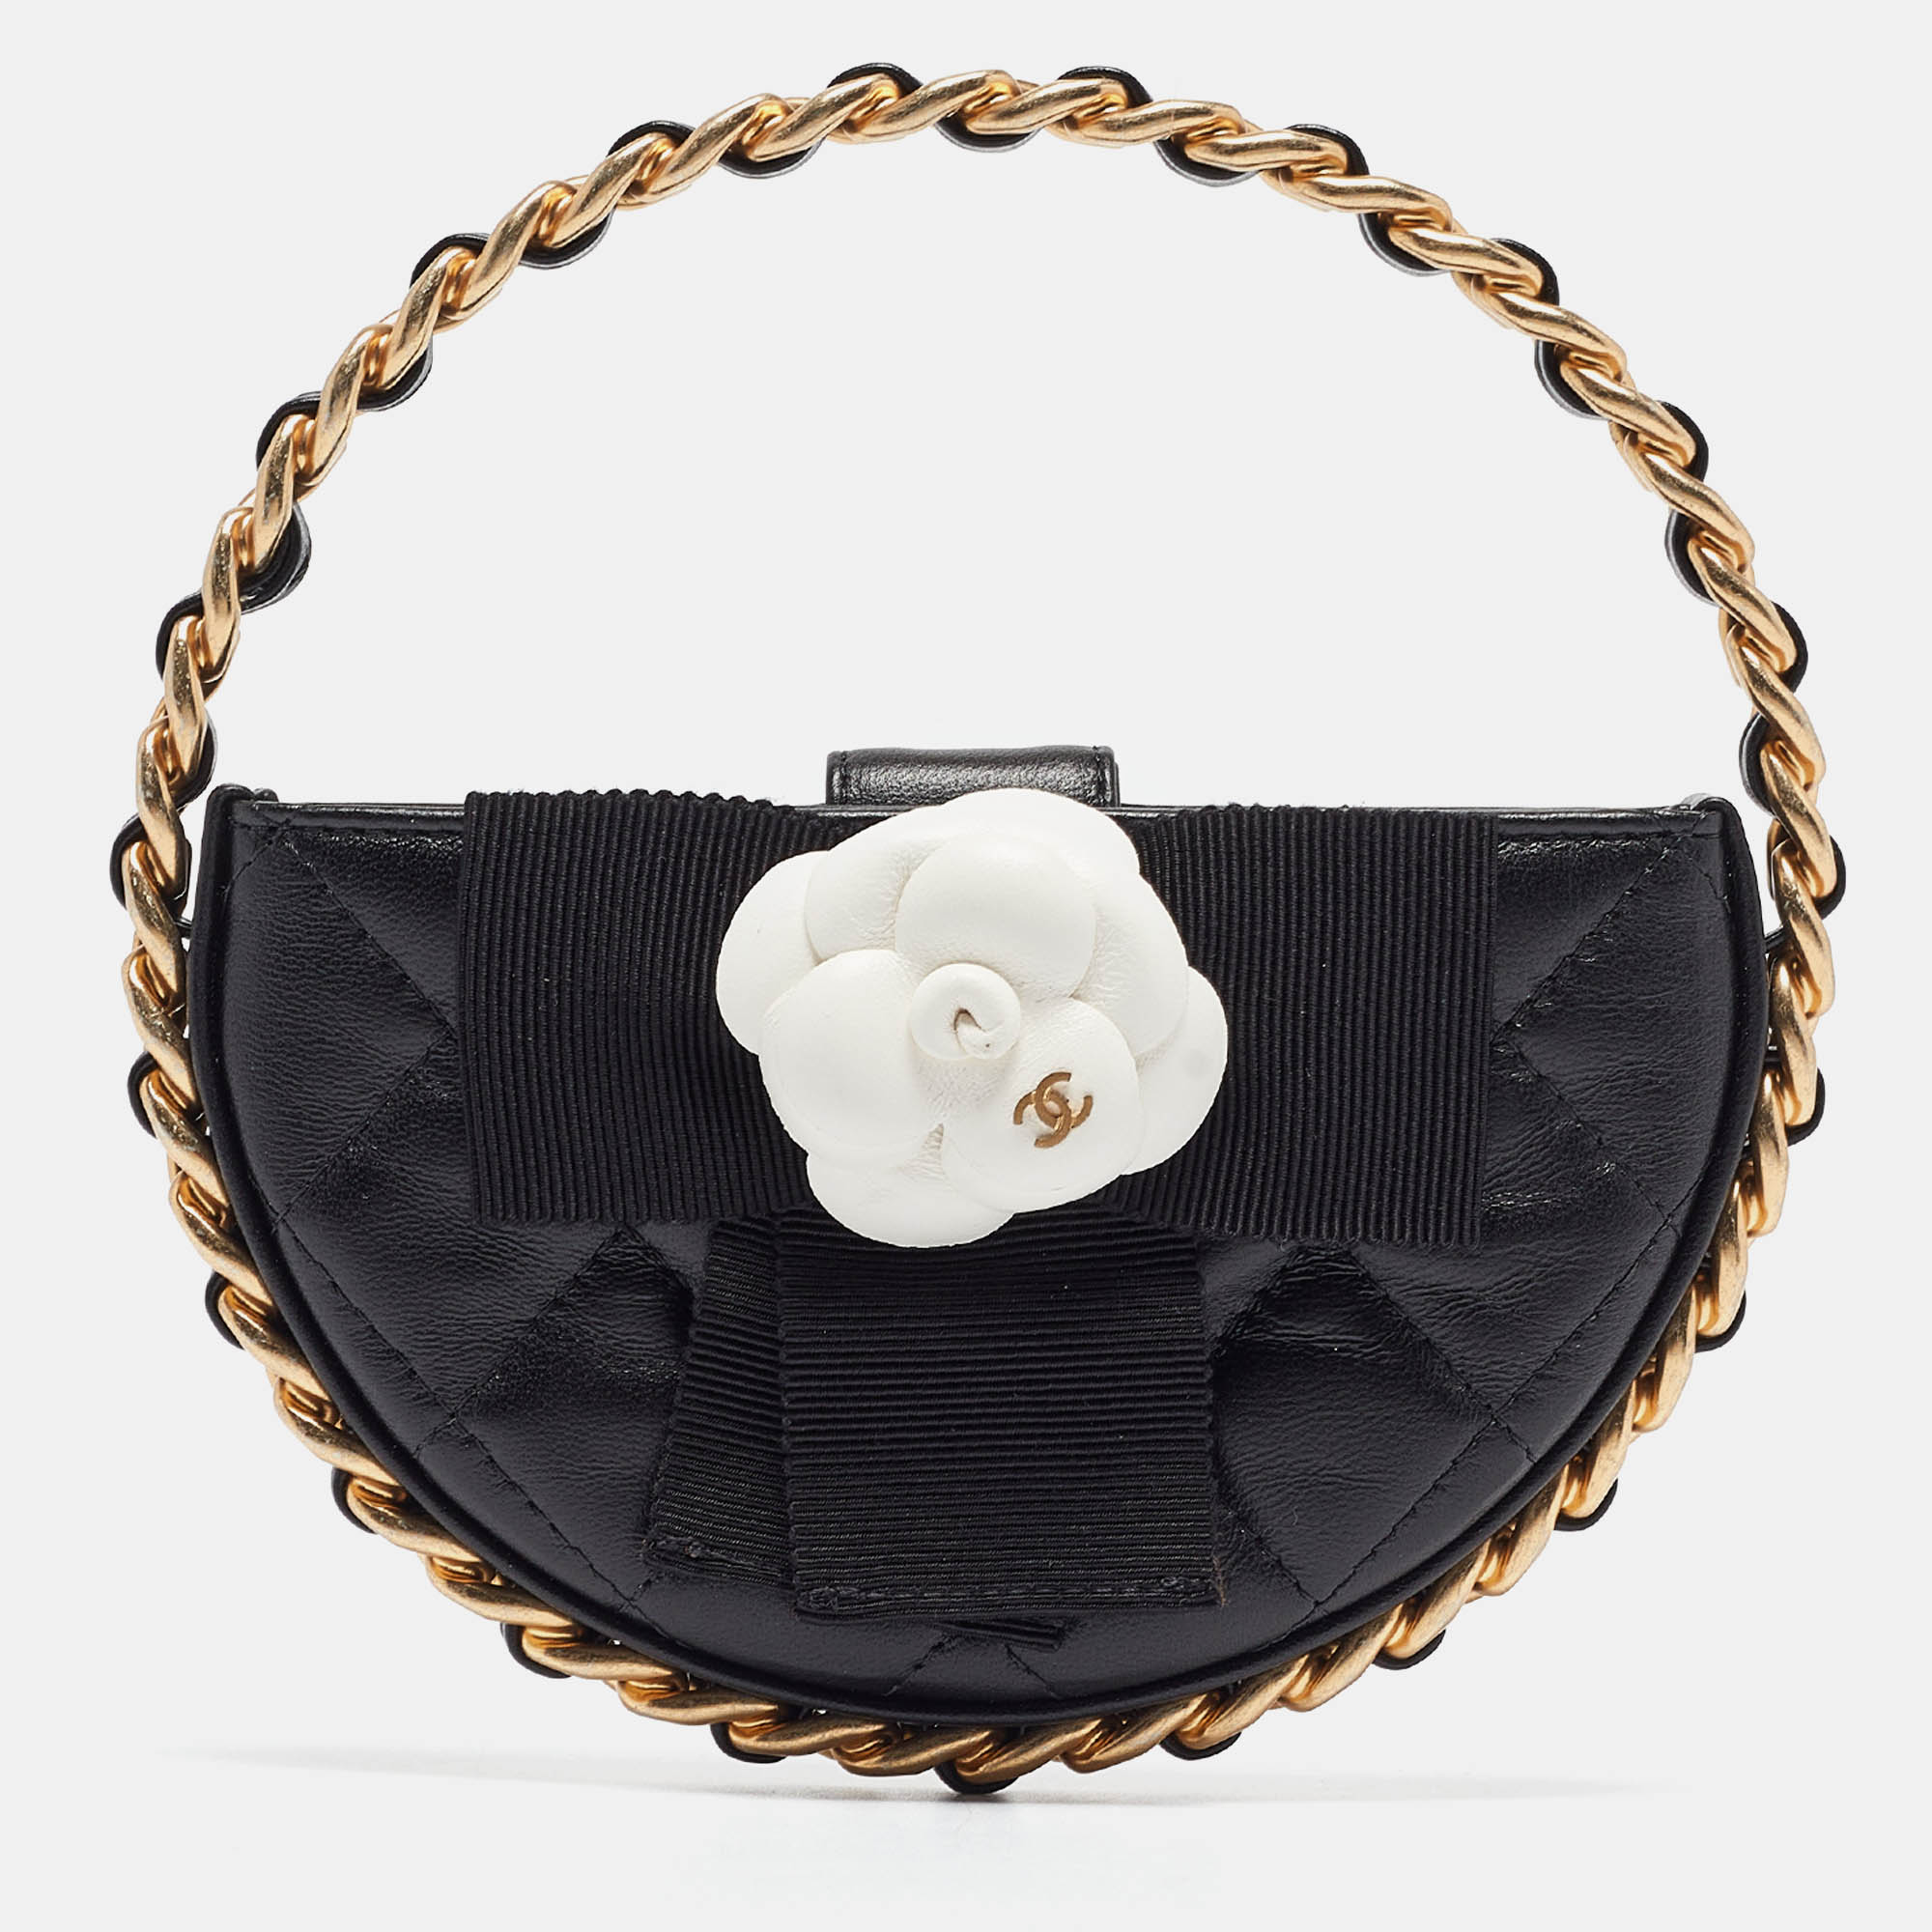 Chanel black quilted leather mini round camellia clutch